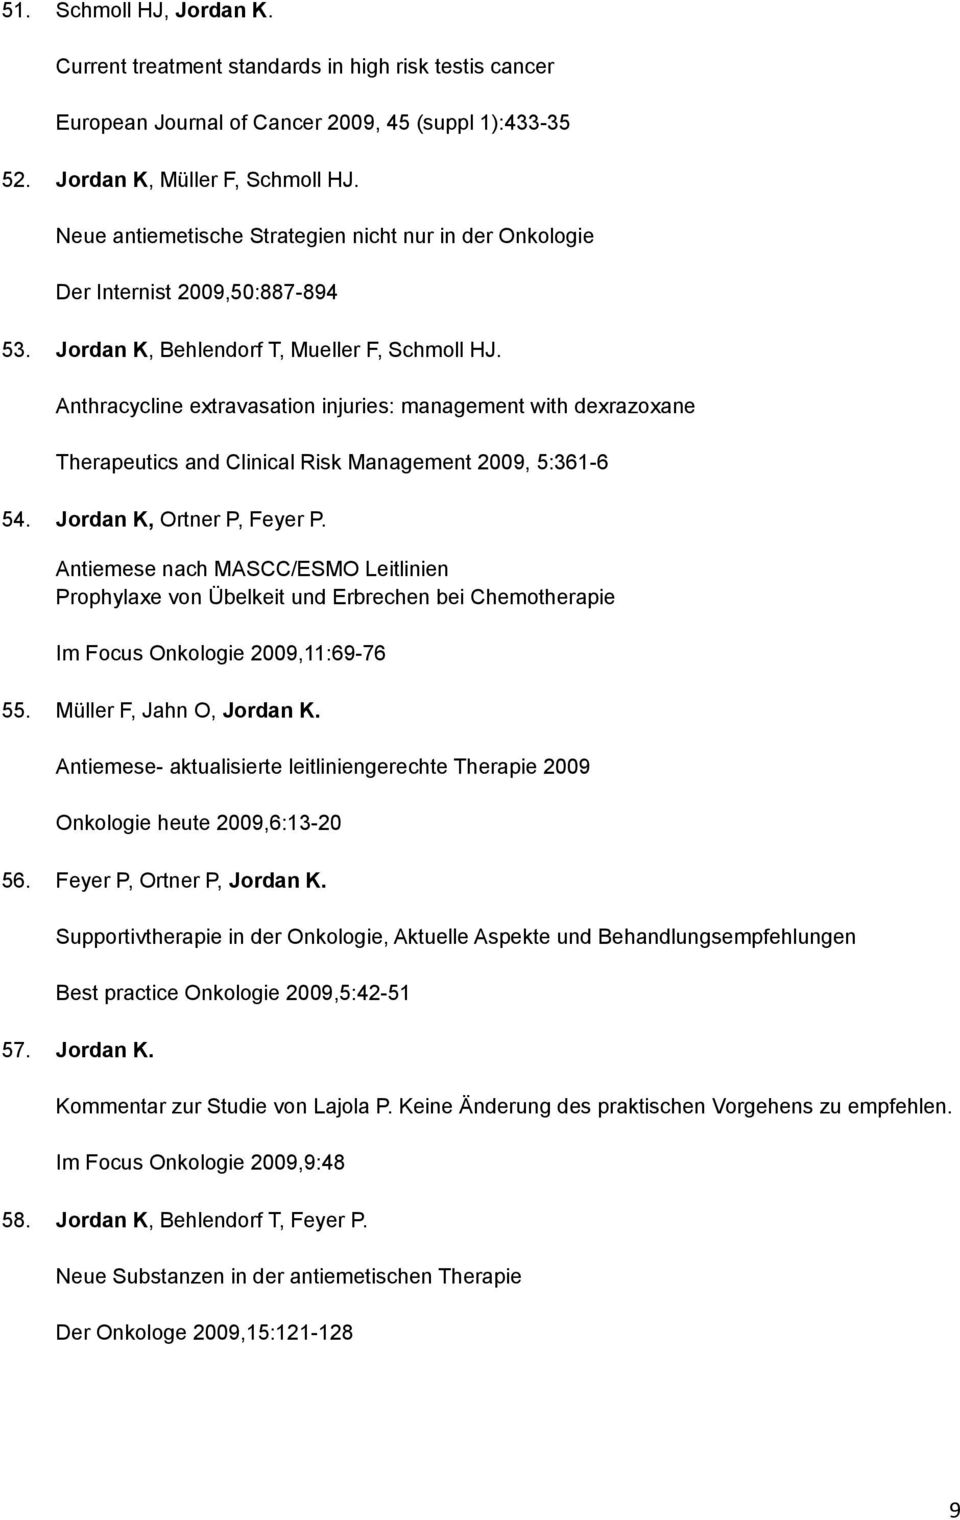 Anthracycline extravasation injuries: management with dexrazoxane Therapeutics and Clinical Risk Management 2009, 5:361-6 54. Jordan K, Ortner P, Feyer P.